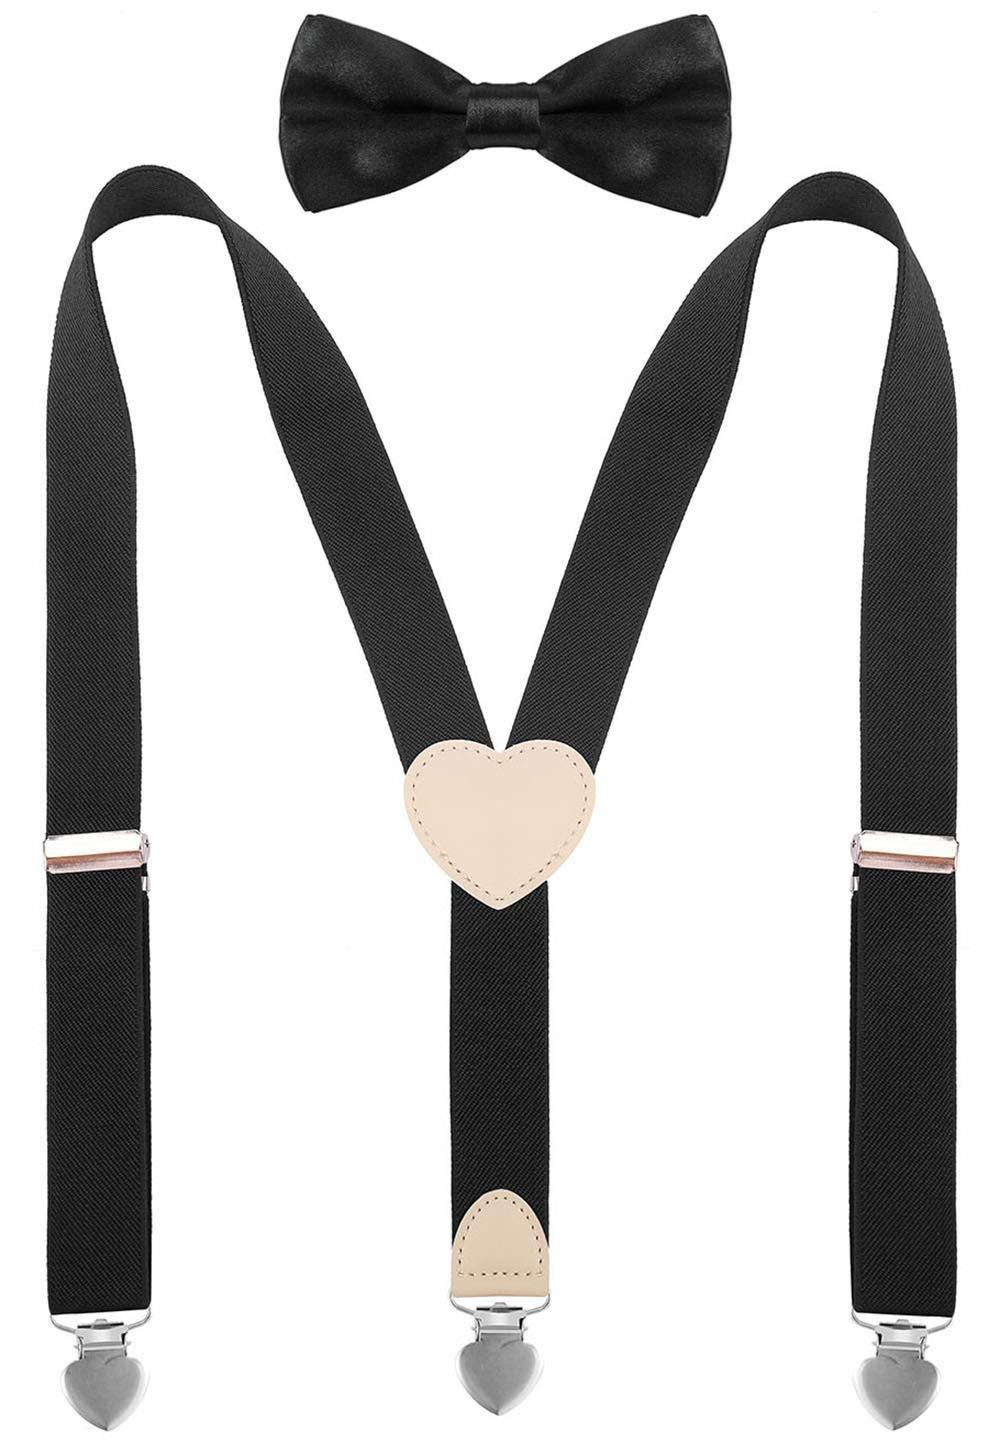 [Australia] - YJDS Suspenders for Boys and Bow Tie Set Y Back Heart-Shaped Clips Black S: 24'' (6 months-3 yrs) 